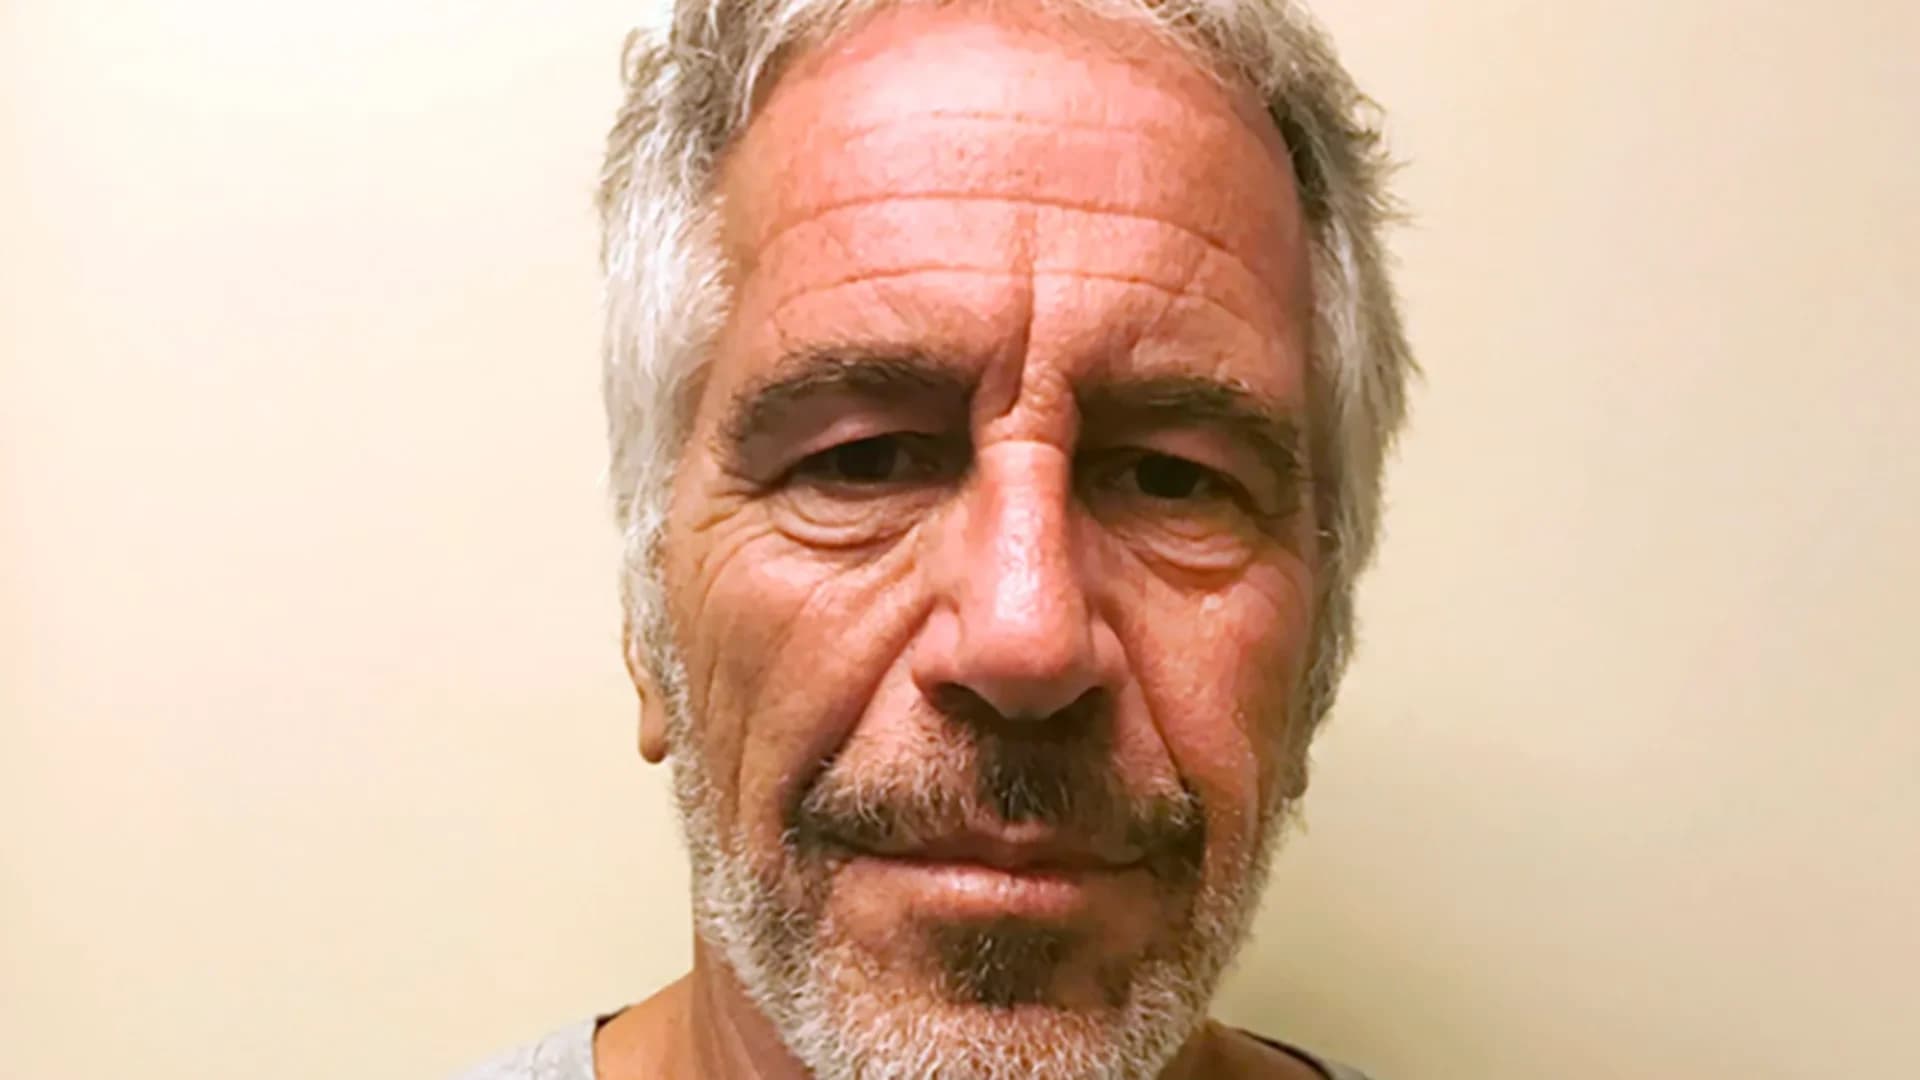 2 guards responsible for monitoring Jeffrey Epstein charged with falsifying prison records